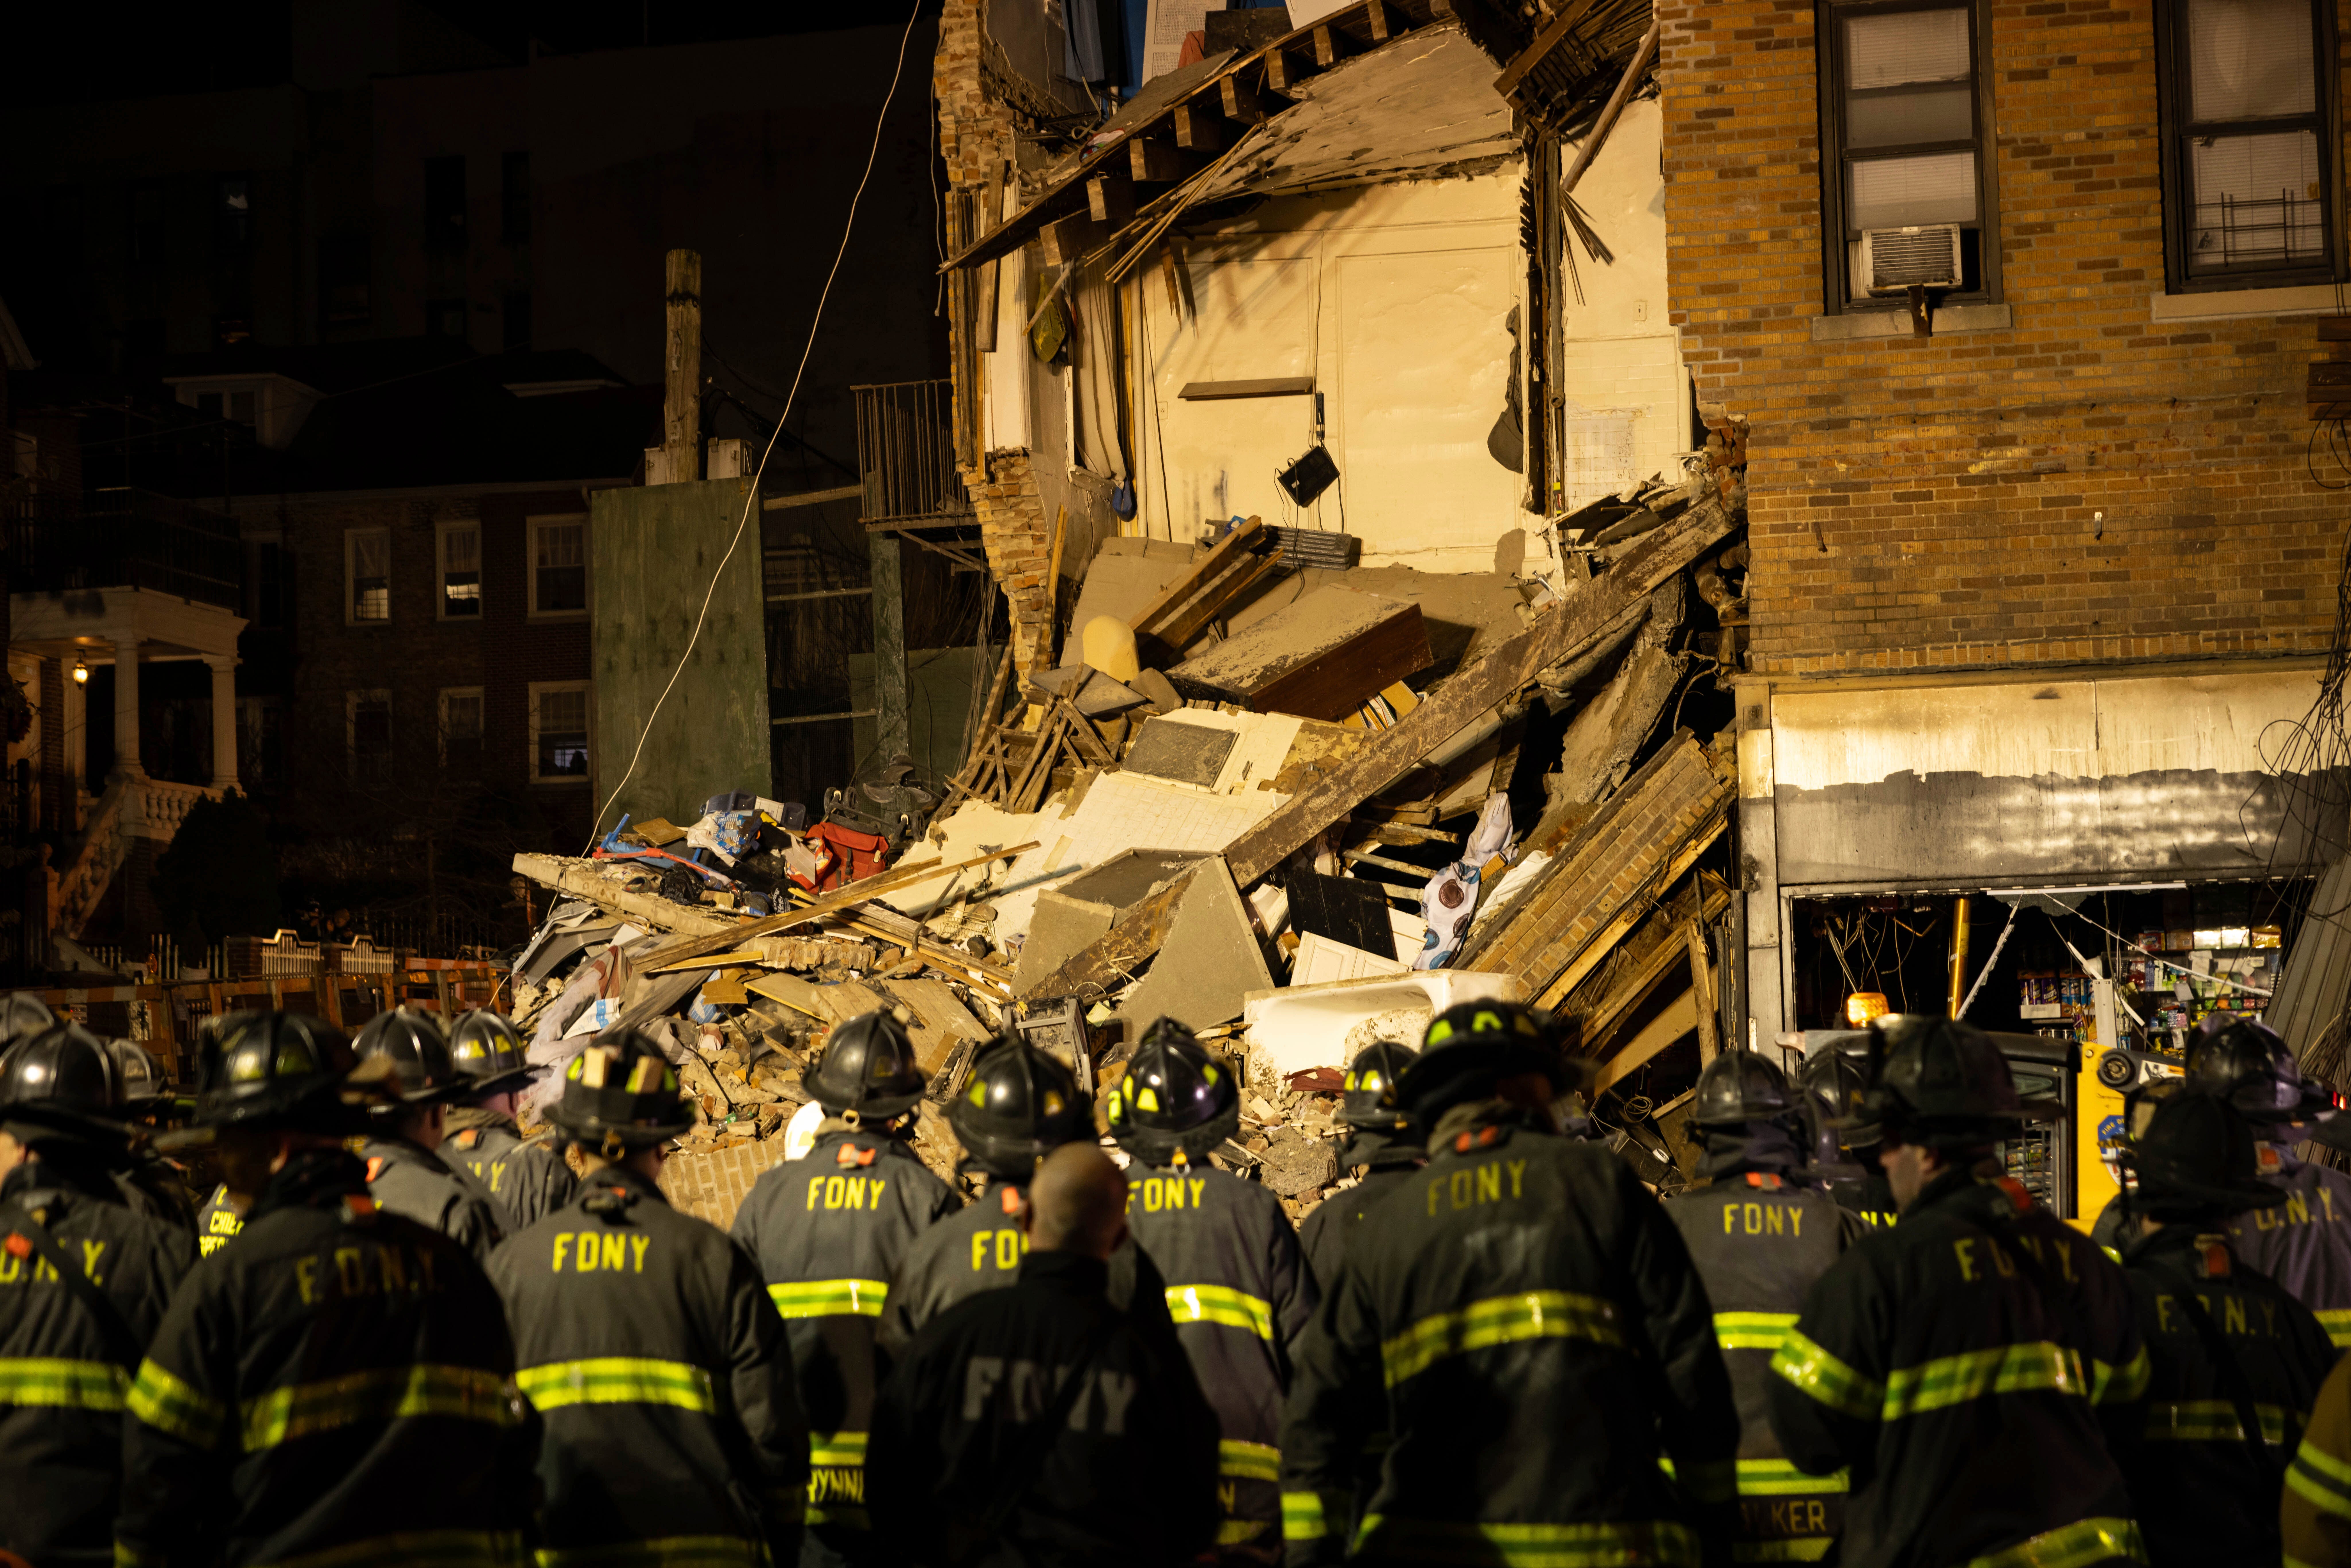 Firefighters assembling at the scene of a collapsed building in the Bronx